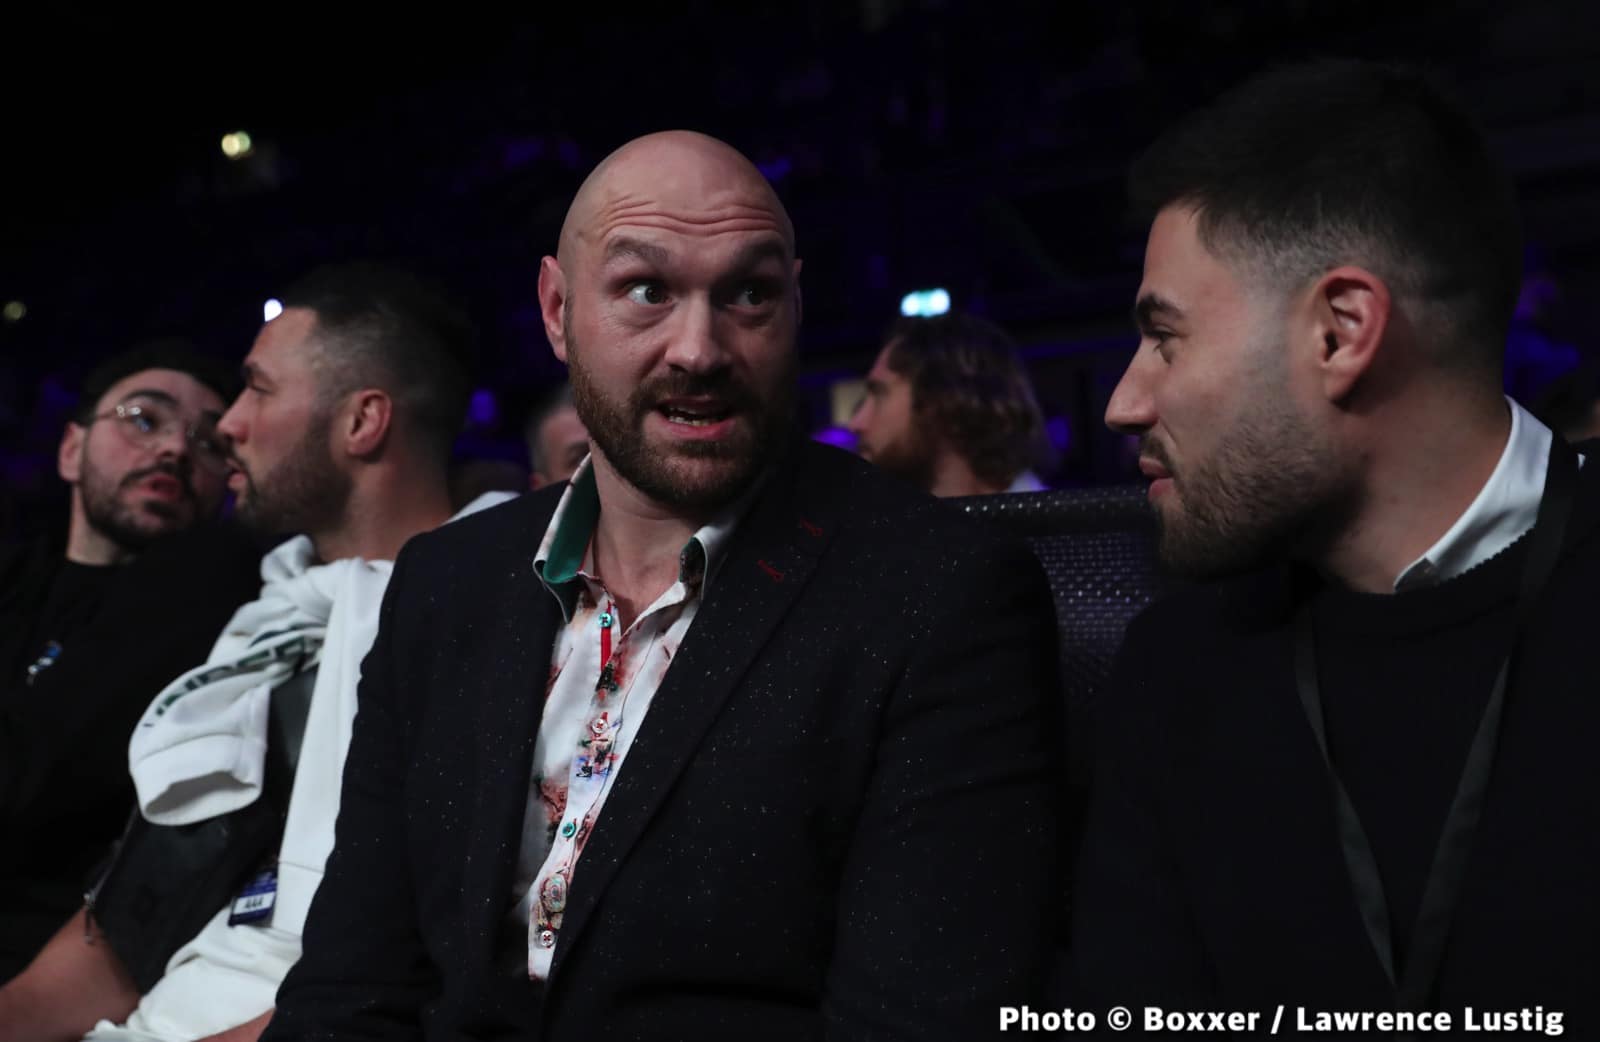 Tyson Fury Sends Dillian Whyte A Message: “Where Are You Hiding, 'White Feathers!'”